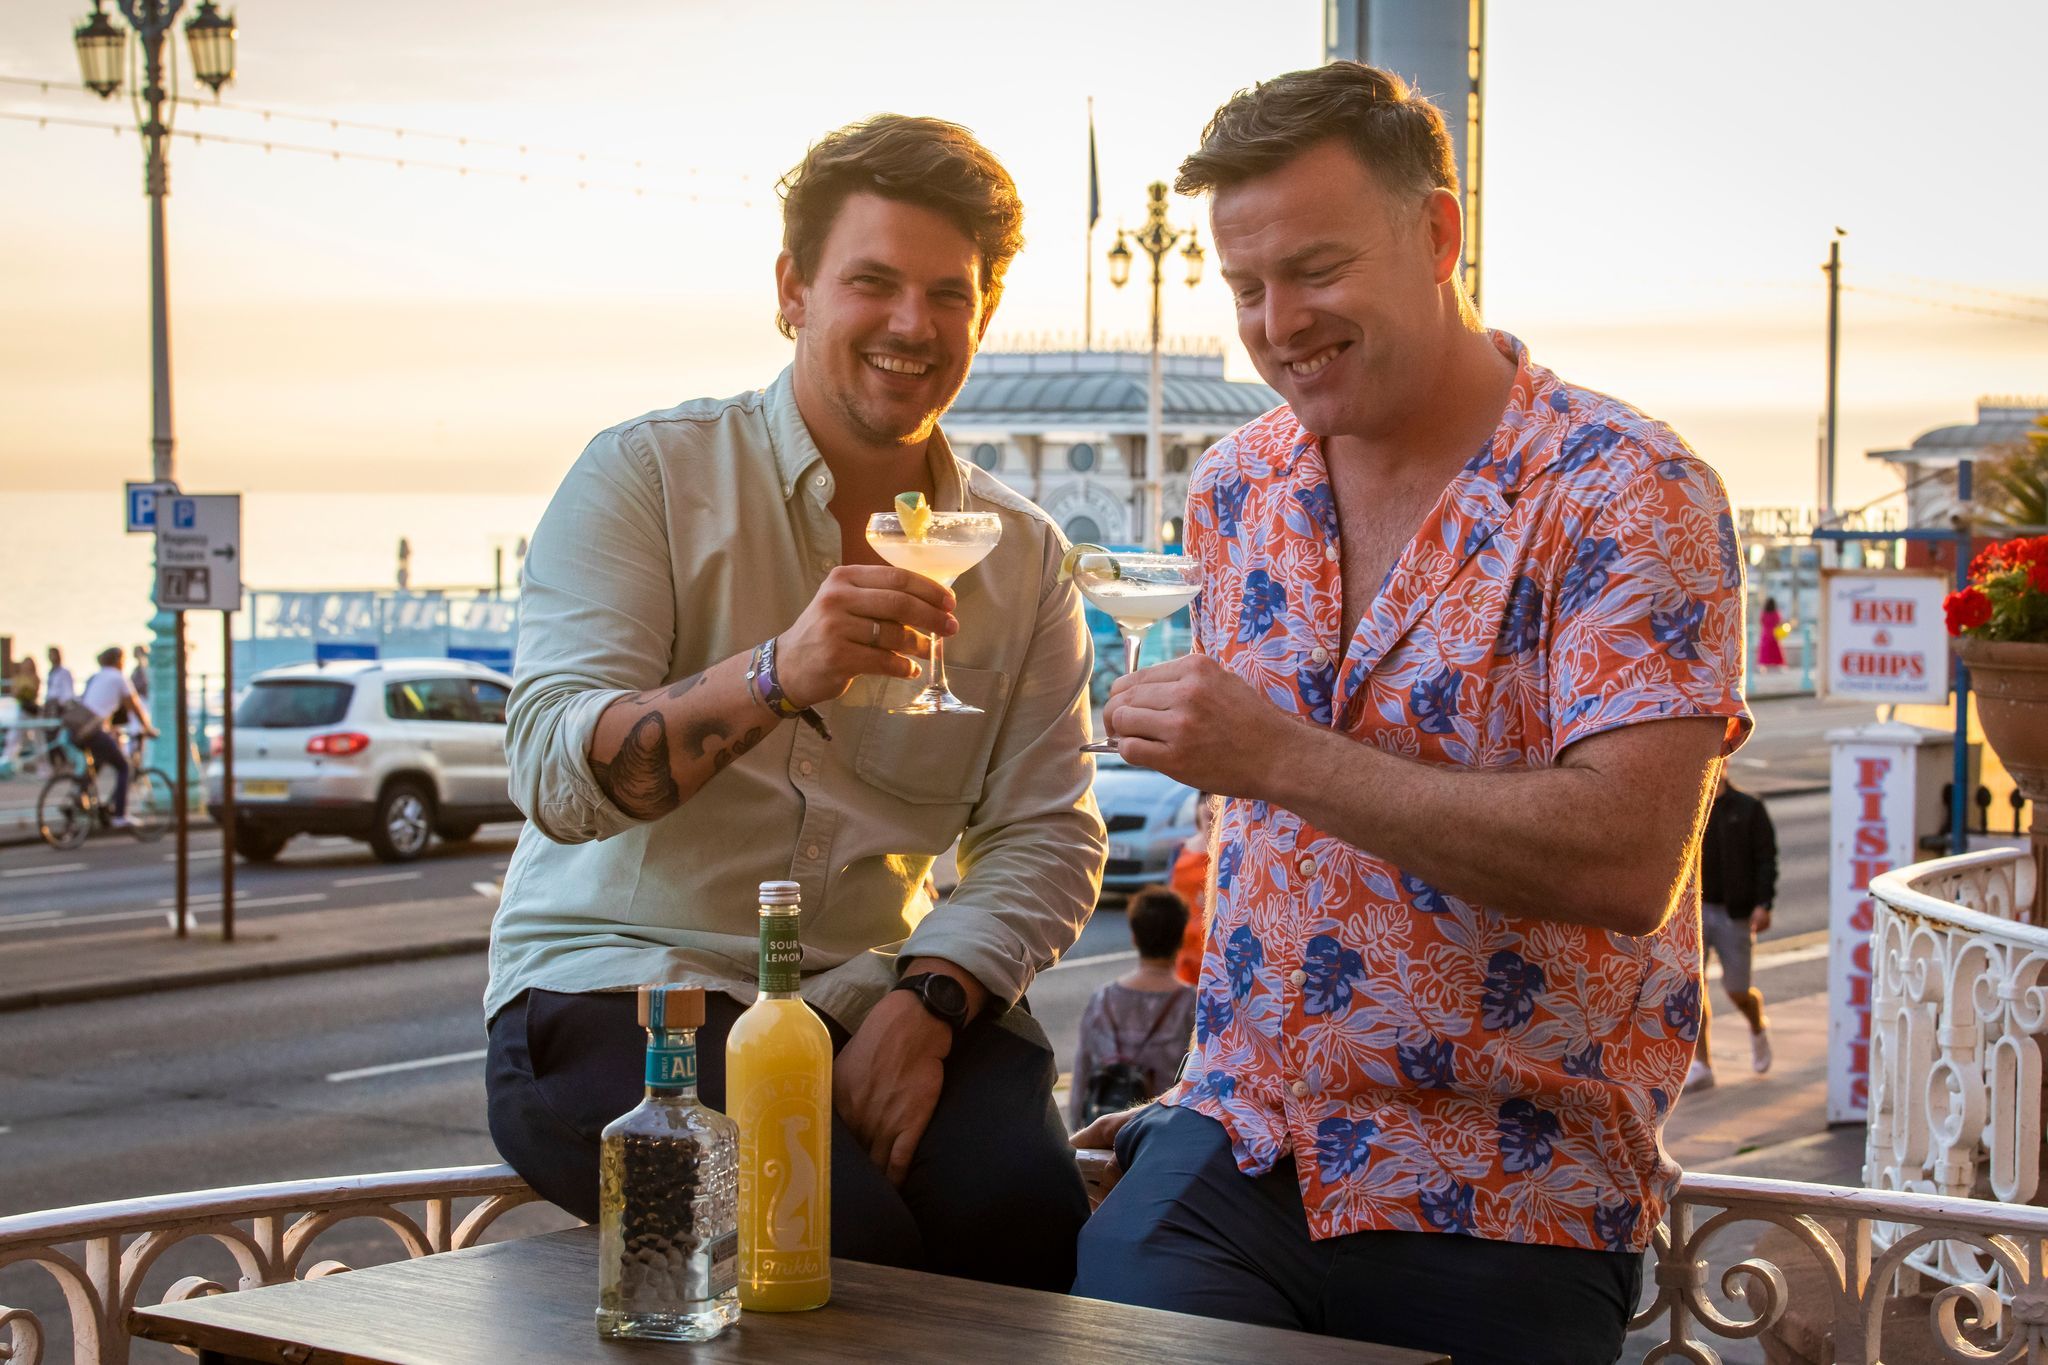 Brighton Metropole Bar terrace. Two men having a toast with their cocktails